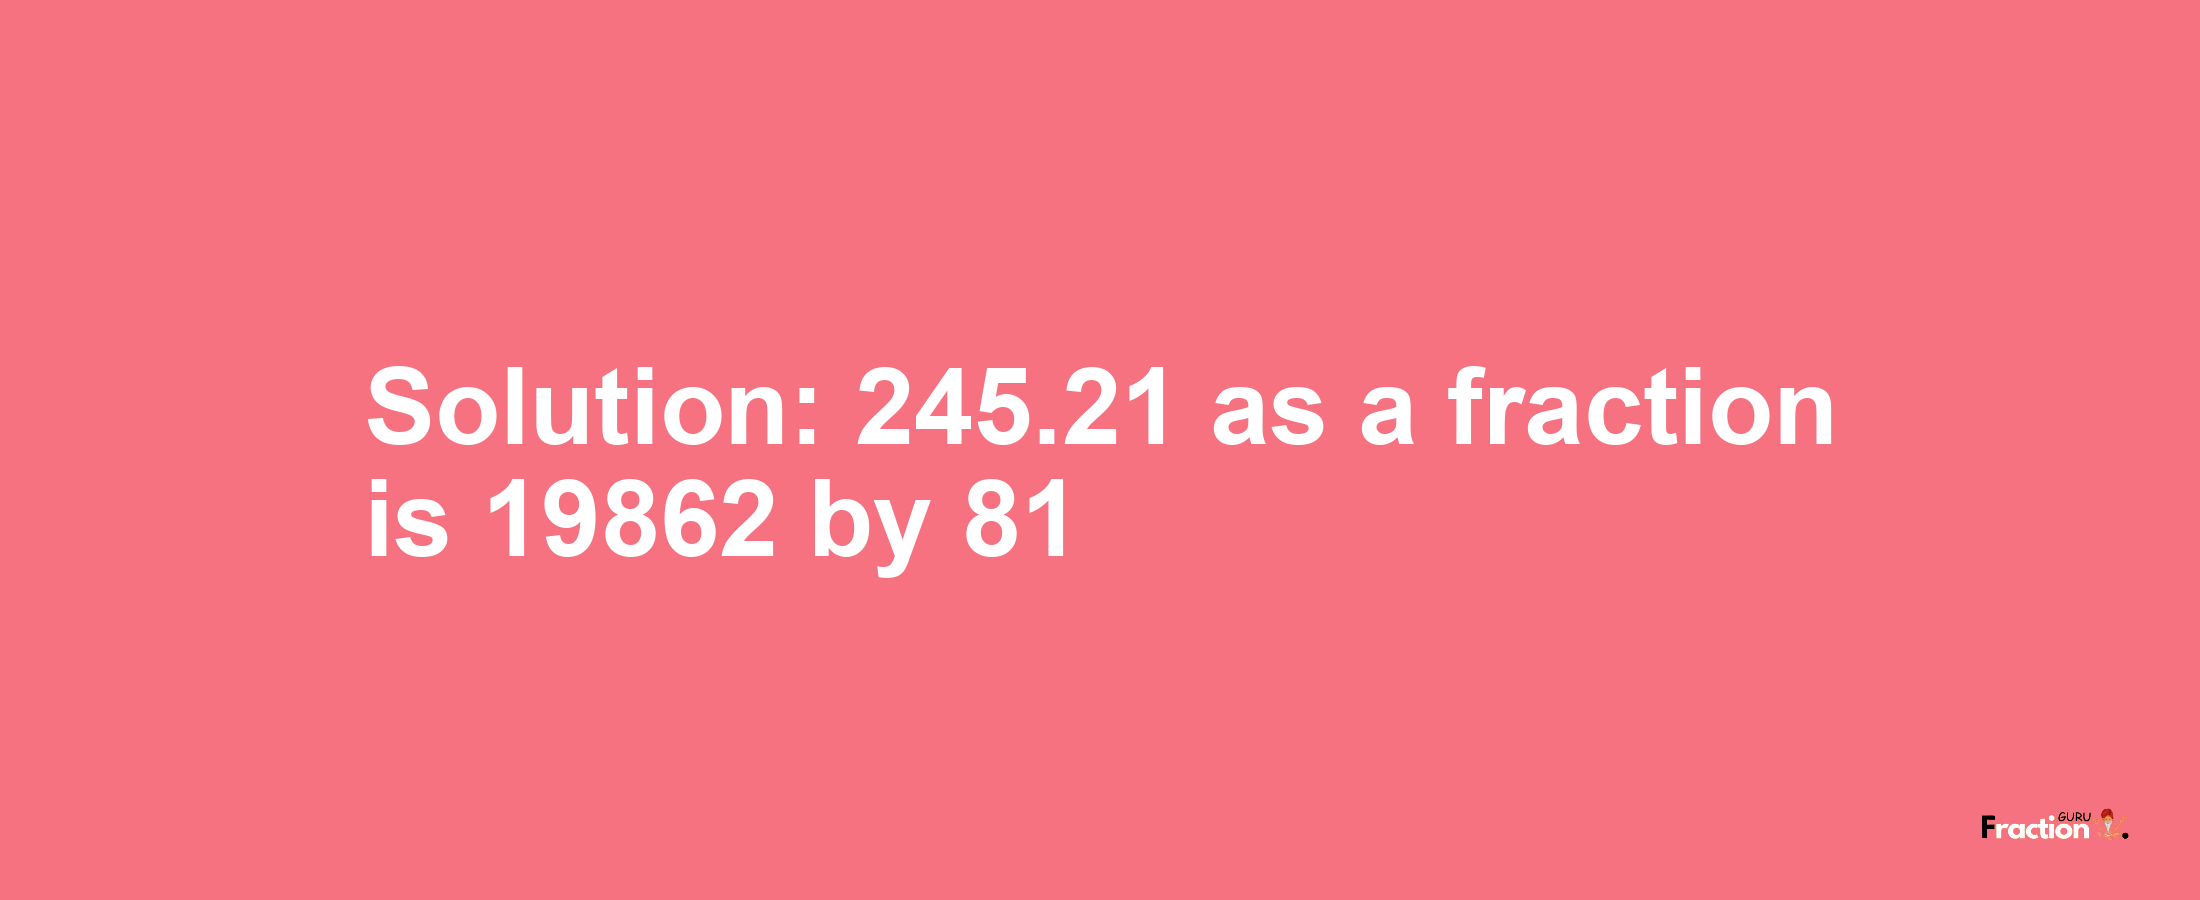 Solution:245.21 as a fraction is 19862/81